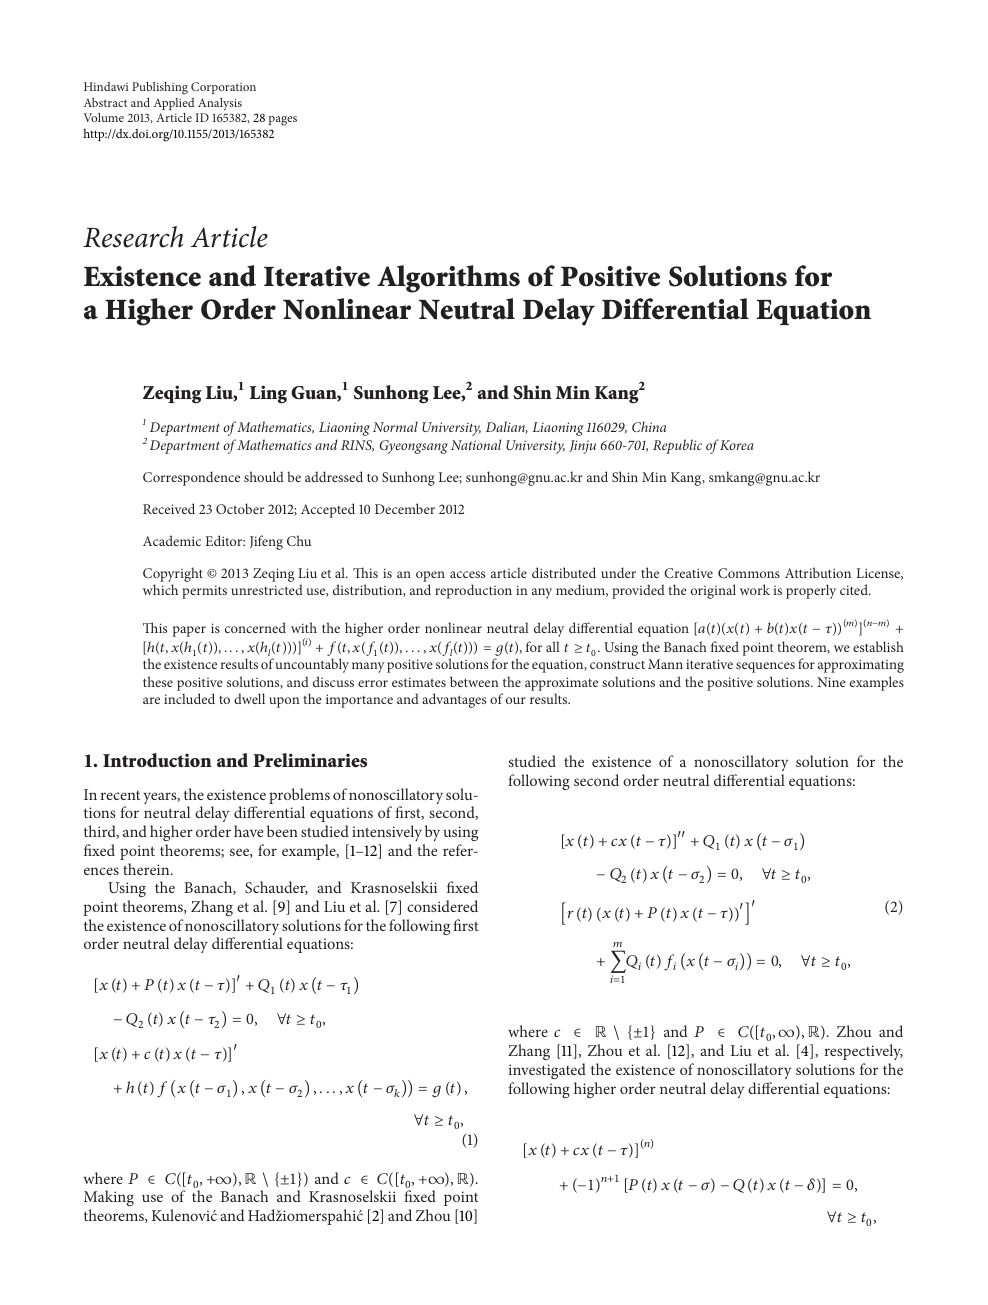 Existence And Iterative Algorithms Of Positive Solutions For A Higher Order Nonlinear Neutral Delay Differential Equation Topic Of Research Paper In Mathematics Download Scholarly Article Pdf And Read For Free On